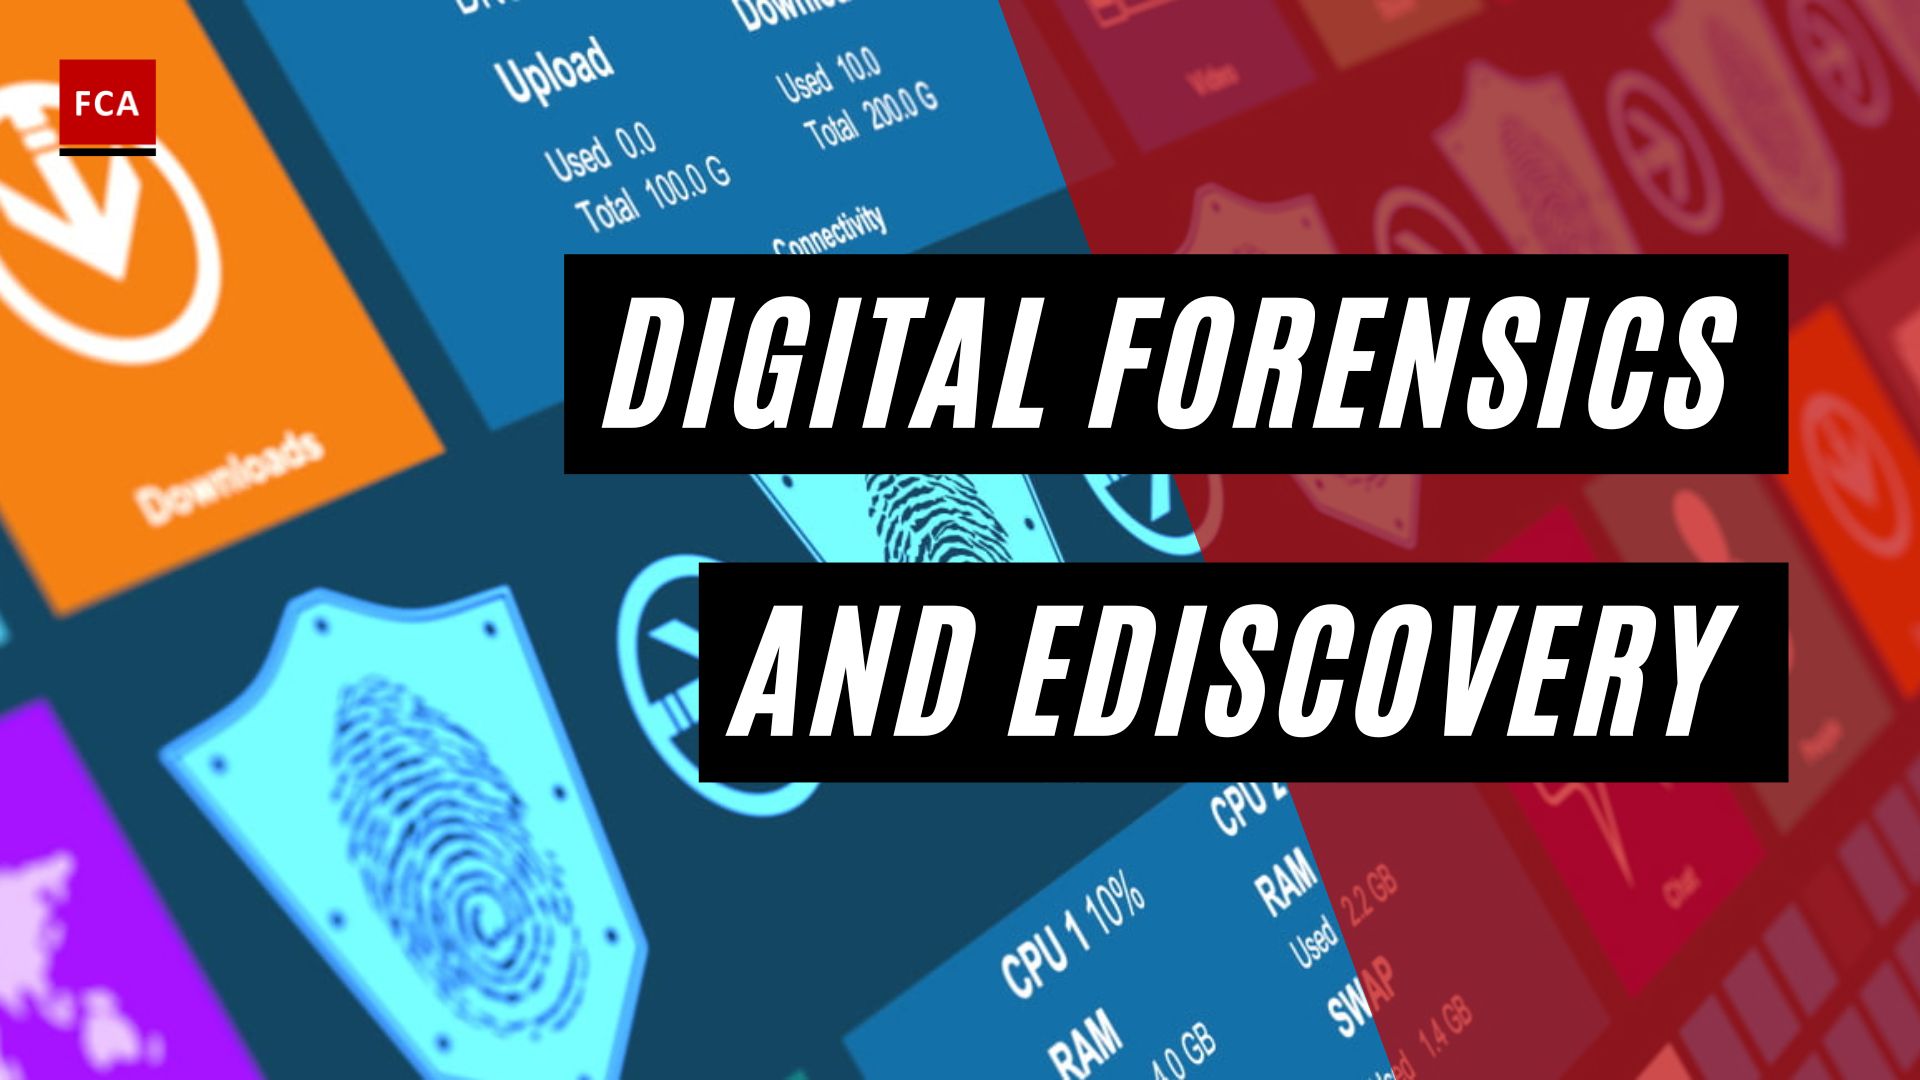 Digital Forensics And Ediscovery